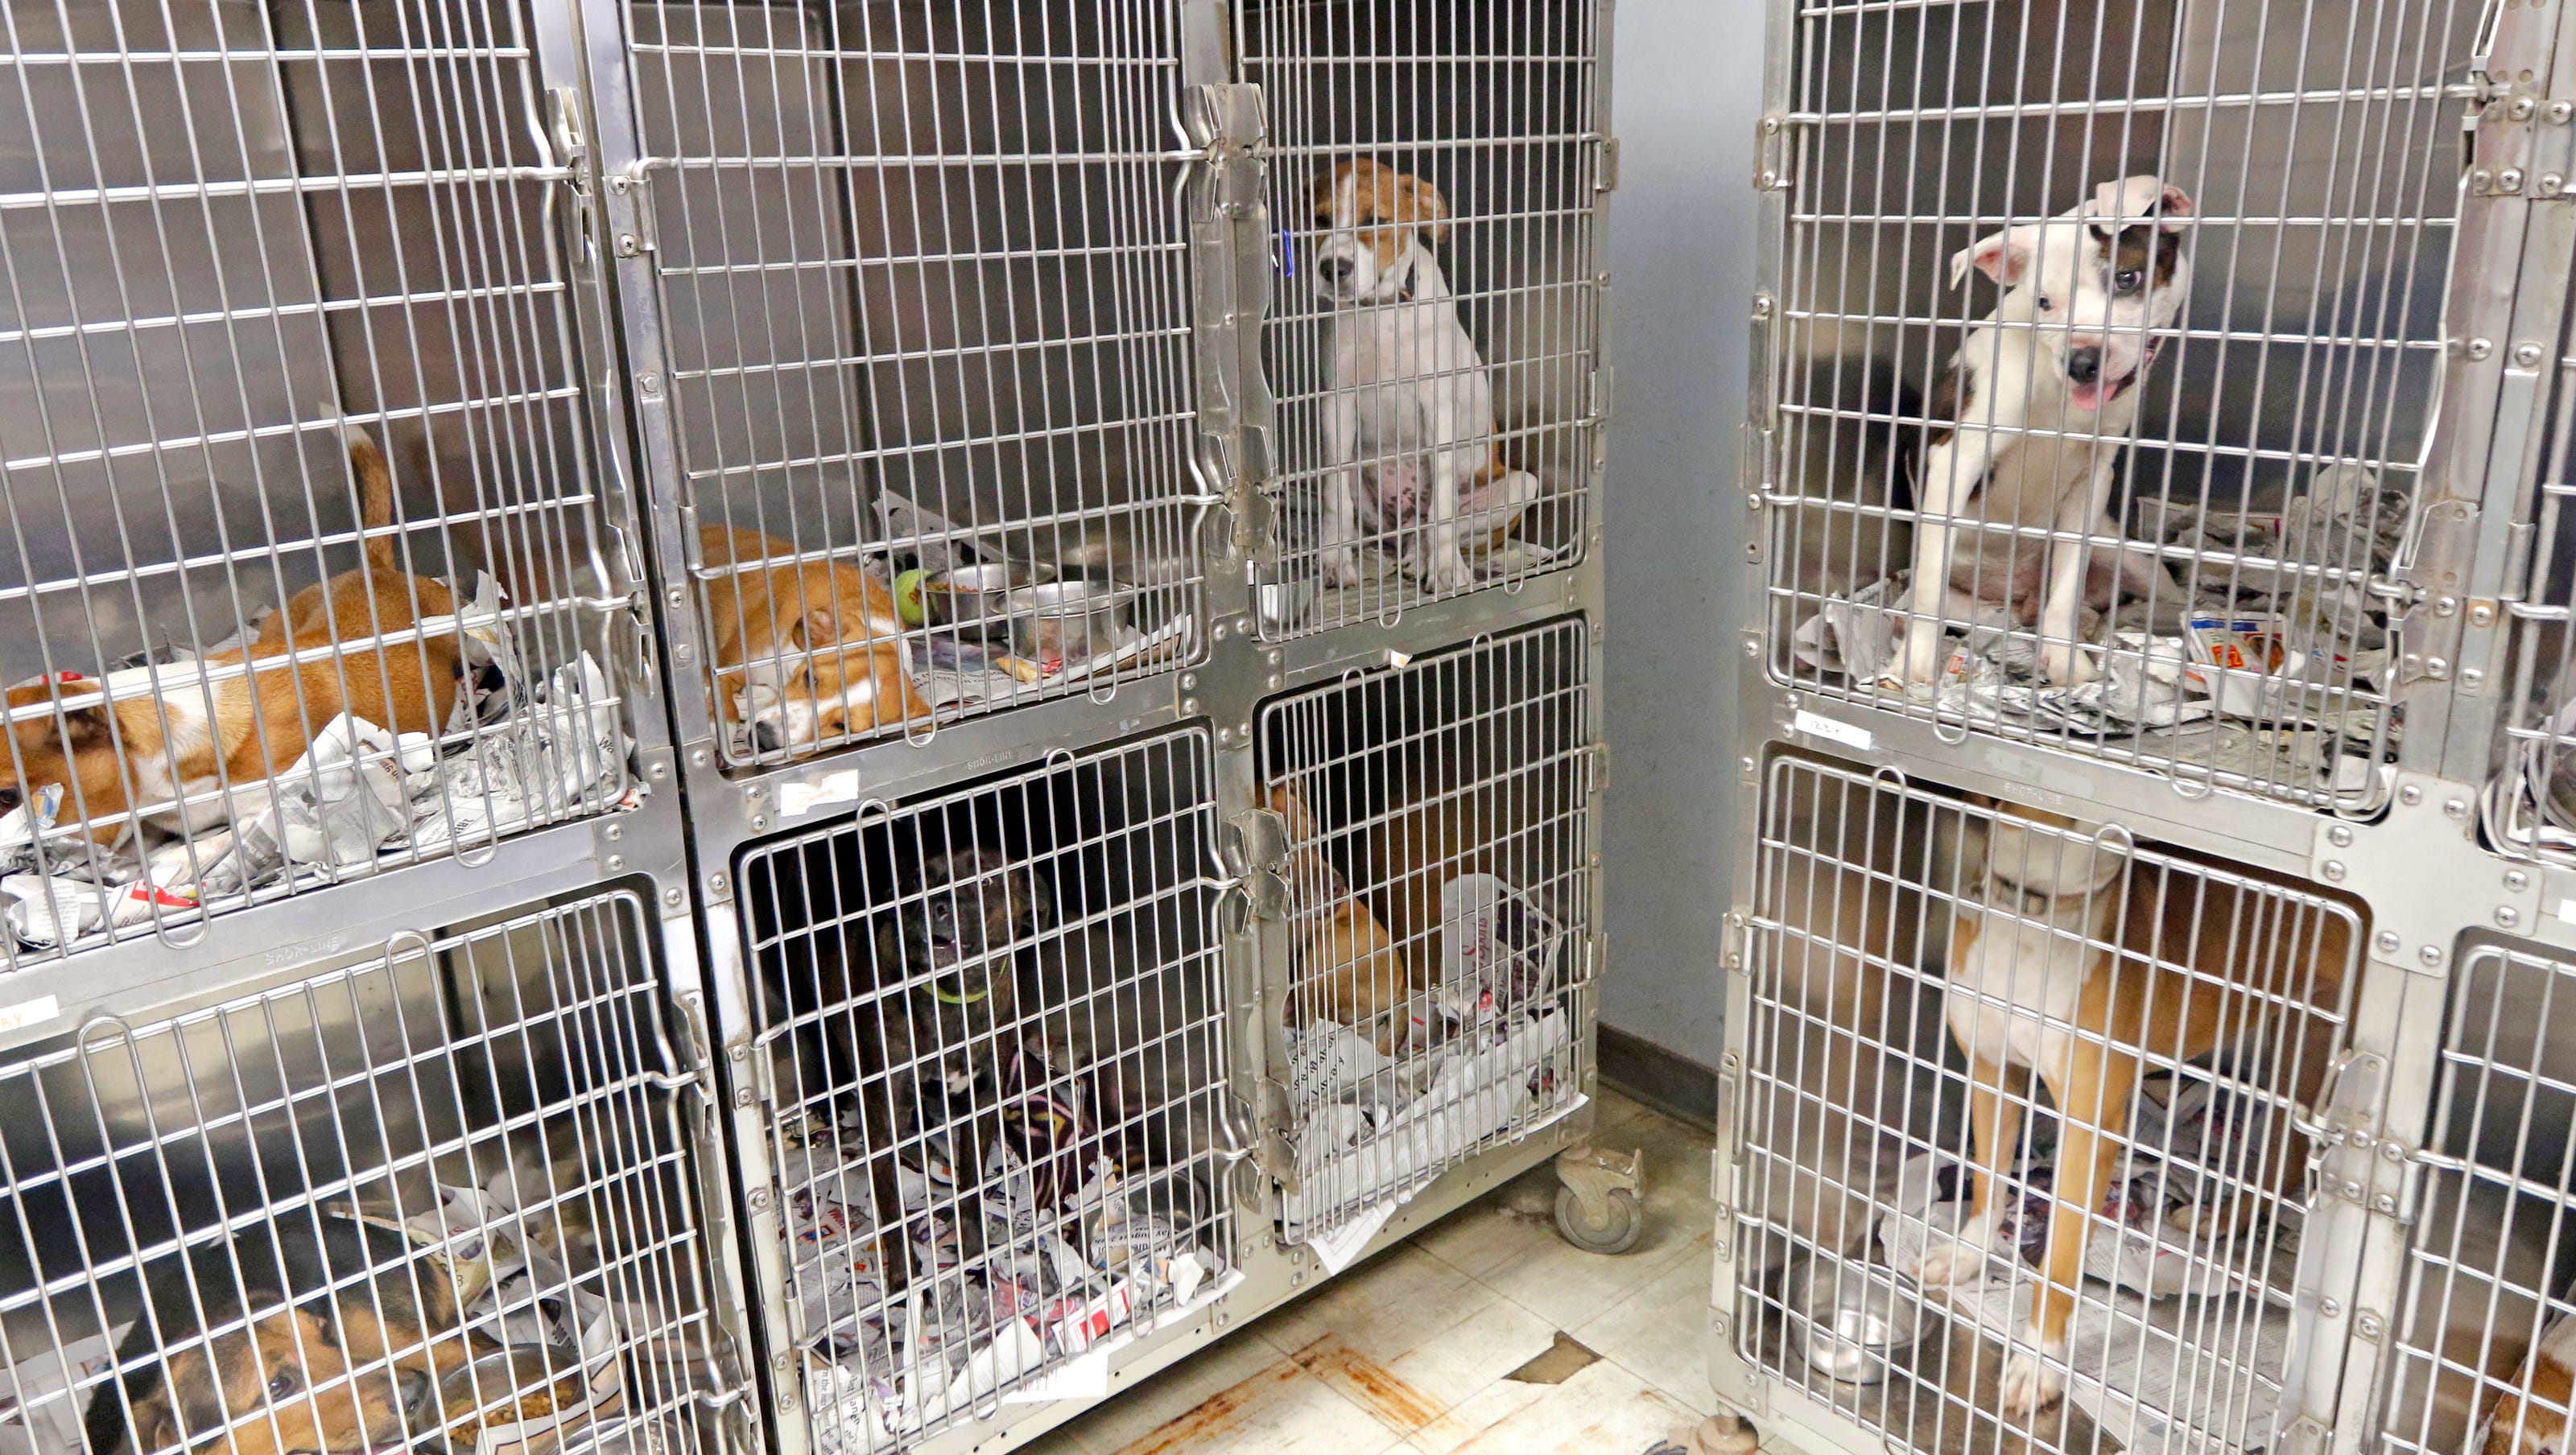 Overcrowded animal shelter in Yukon draws concerns